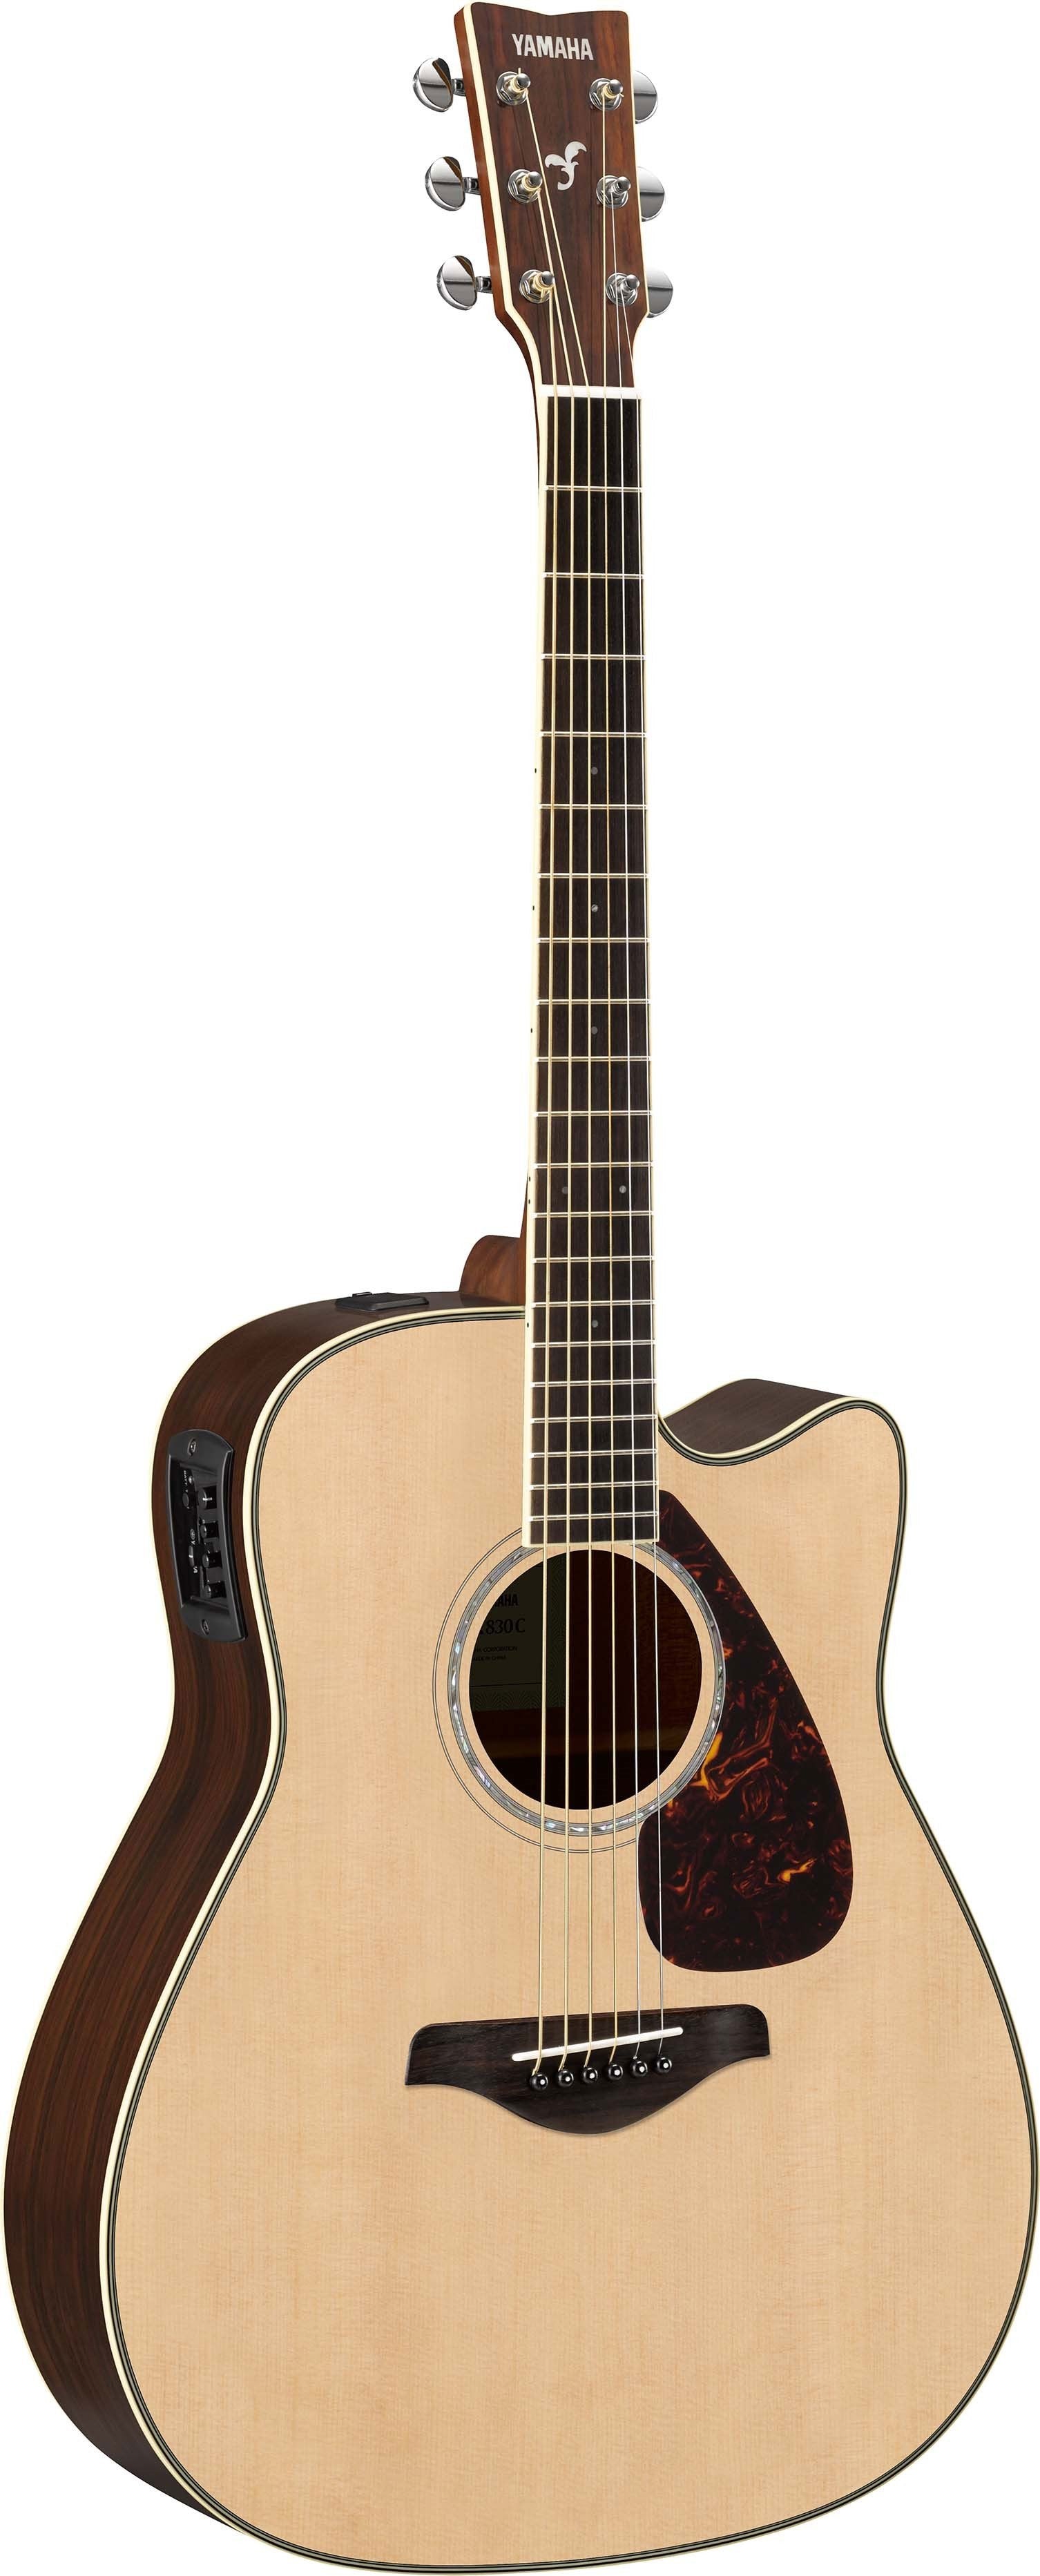 Yamaha FGX830C Acoustic-Electric Guitar - Natural Finish